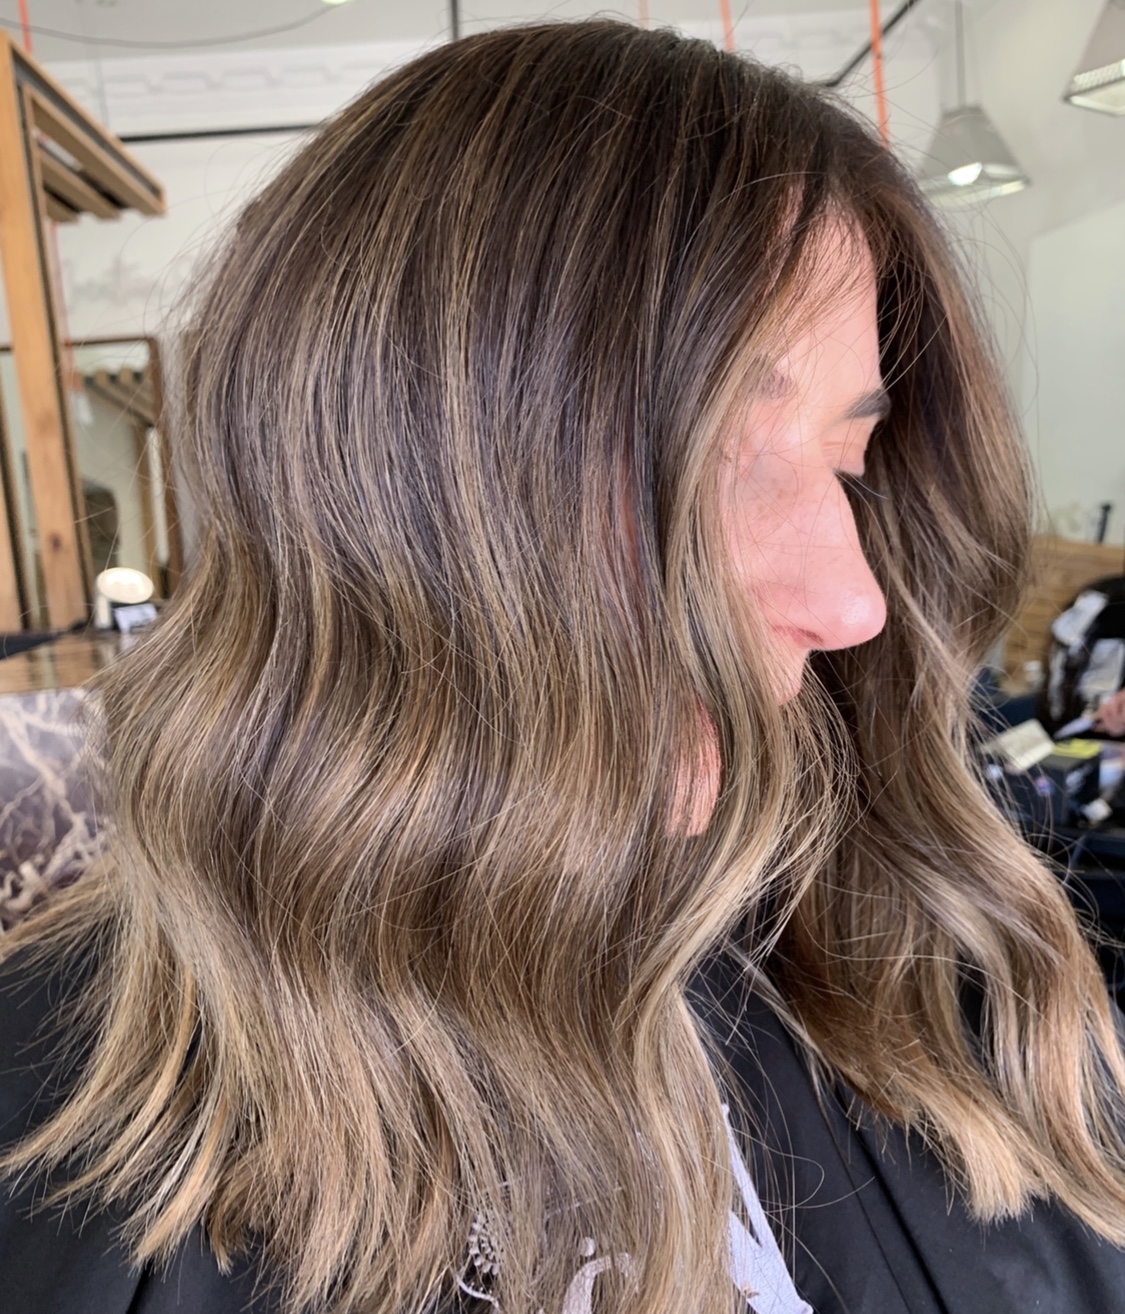 What is Balayage? And is it right for my Hair? - Fon Salon